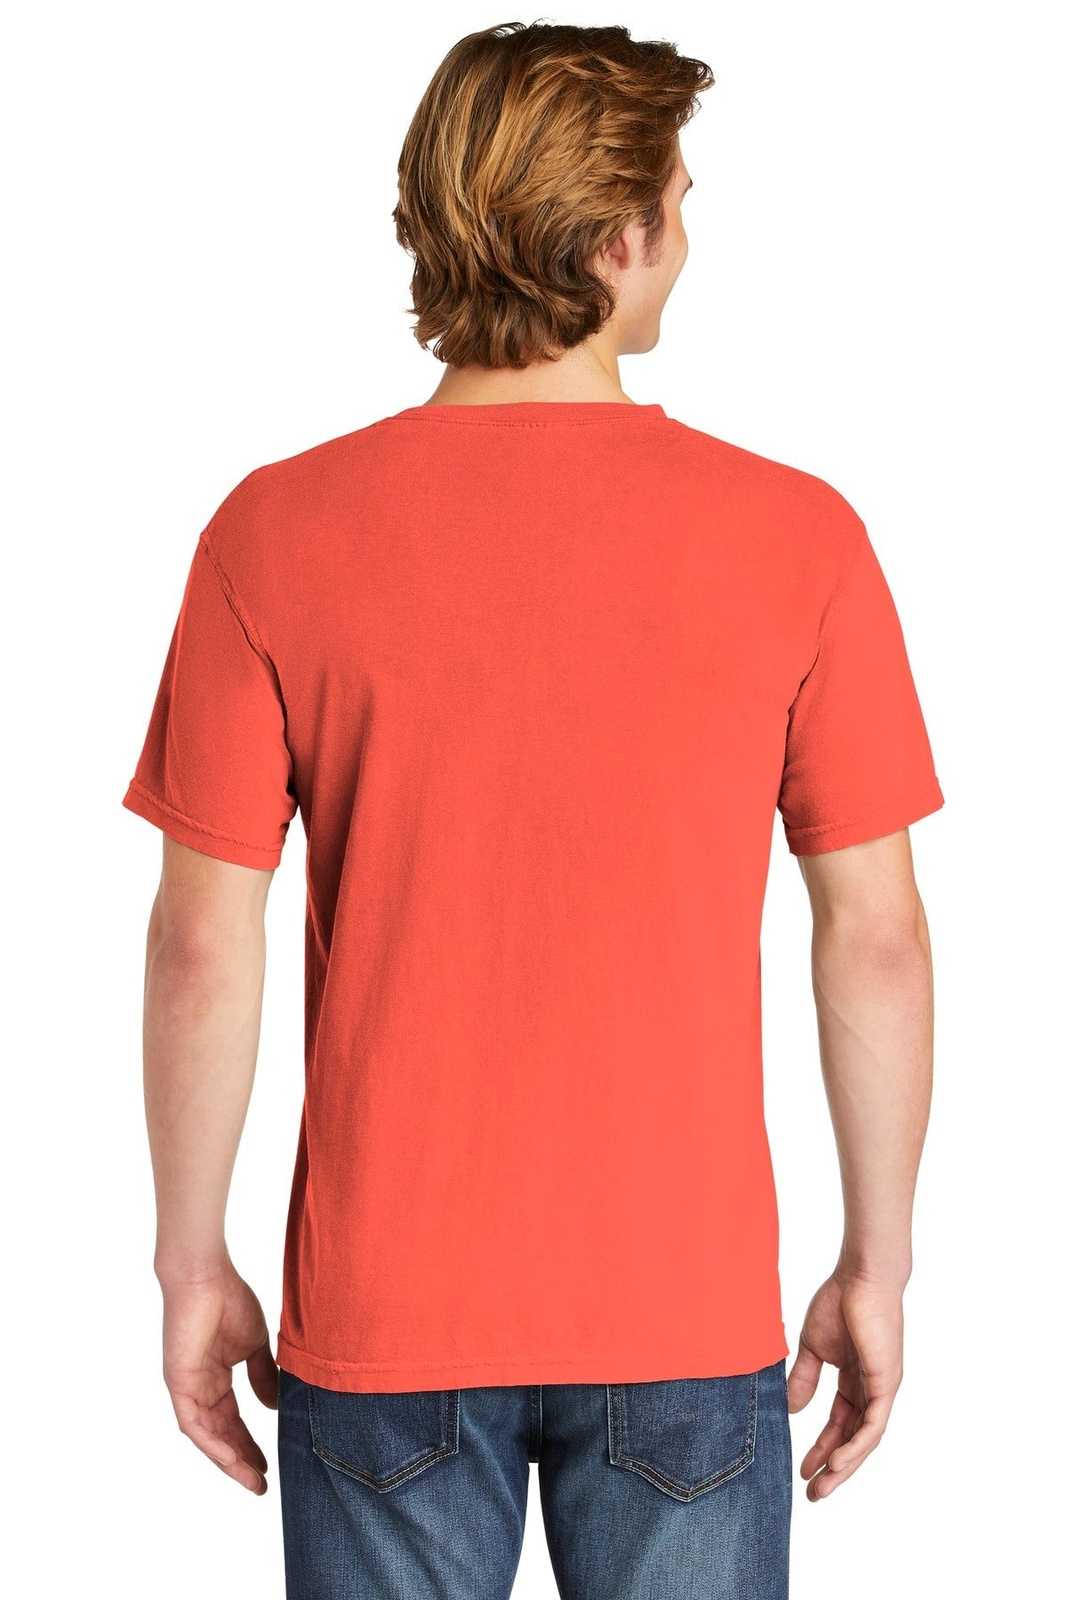 Comfort Colors 1717 Heavyweight Ring Spun Tee - Bright Salmon - HIT a Double